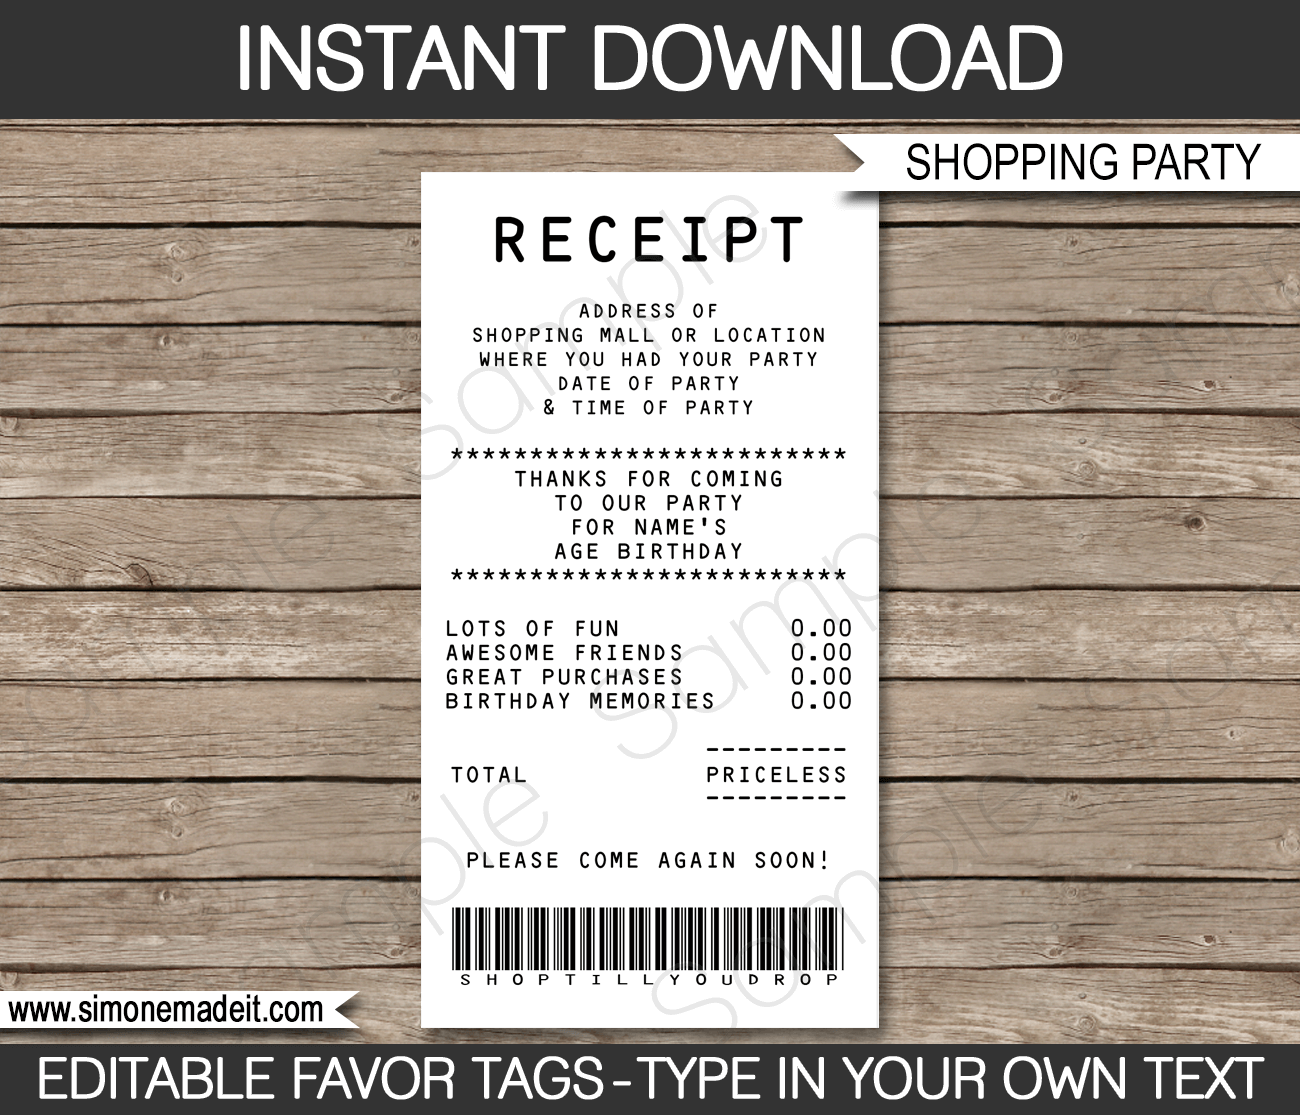 Receipt Style Favor Tags | Thank You Tags | Shopping Party | Mall Scavenger Hunt | Editable and Printable DIY Template | Instant Download via simonemadeit.com